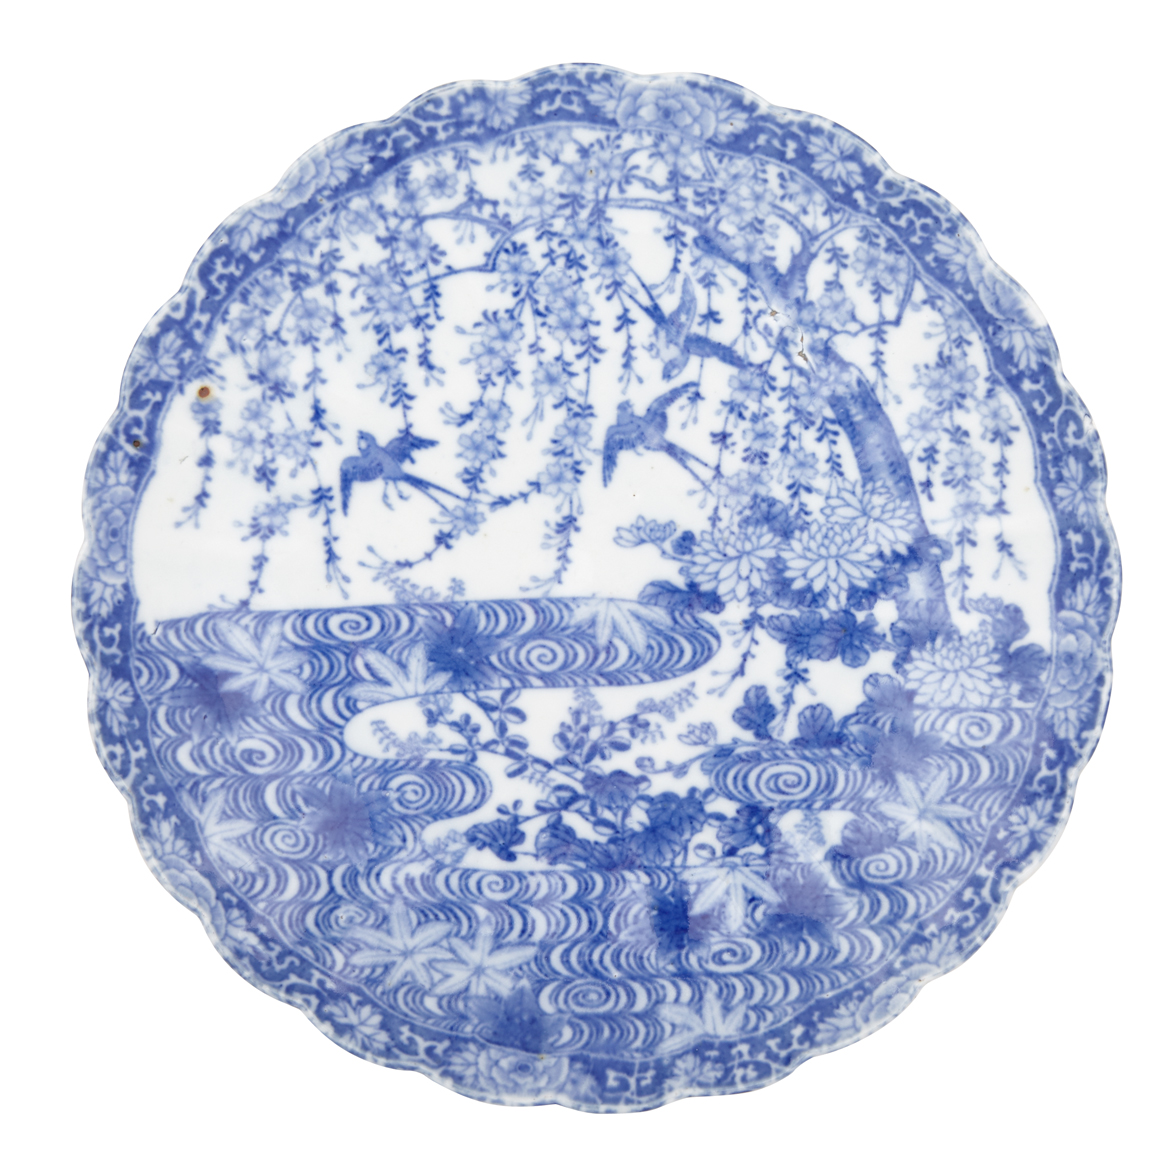 Blue and White Japanese Arita Charger, 20th Century